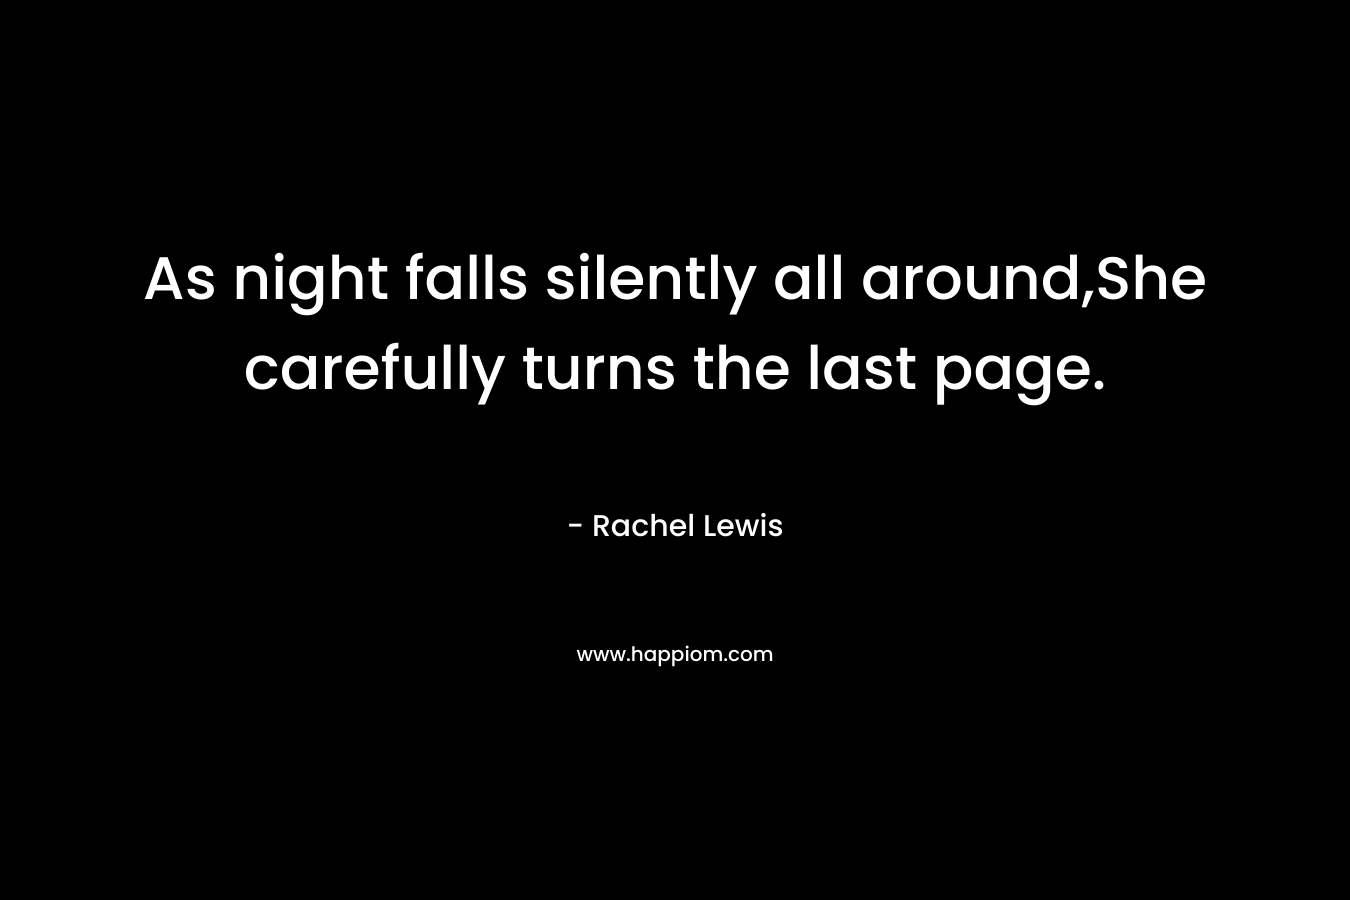 As night falls silently all around,She carefully turns the last page.